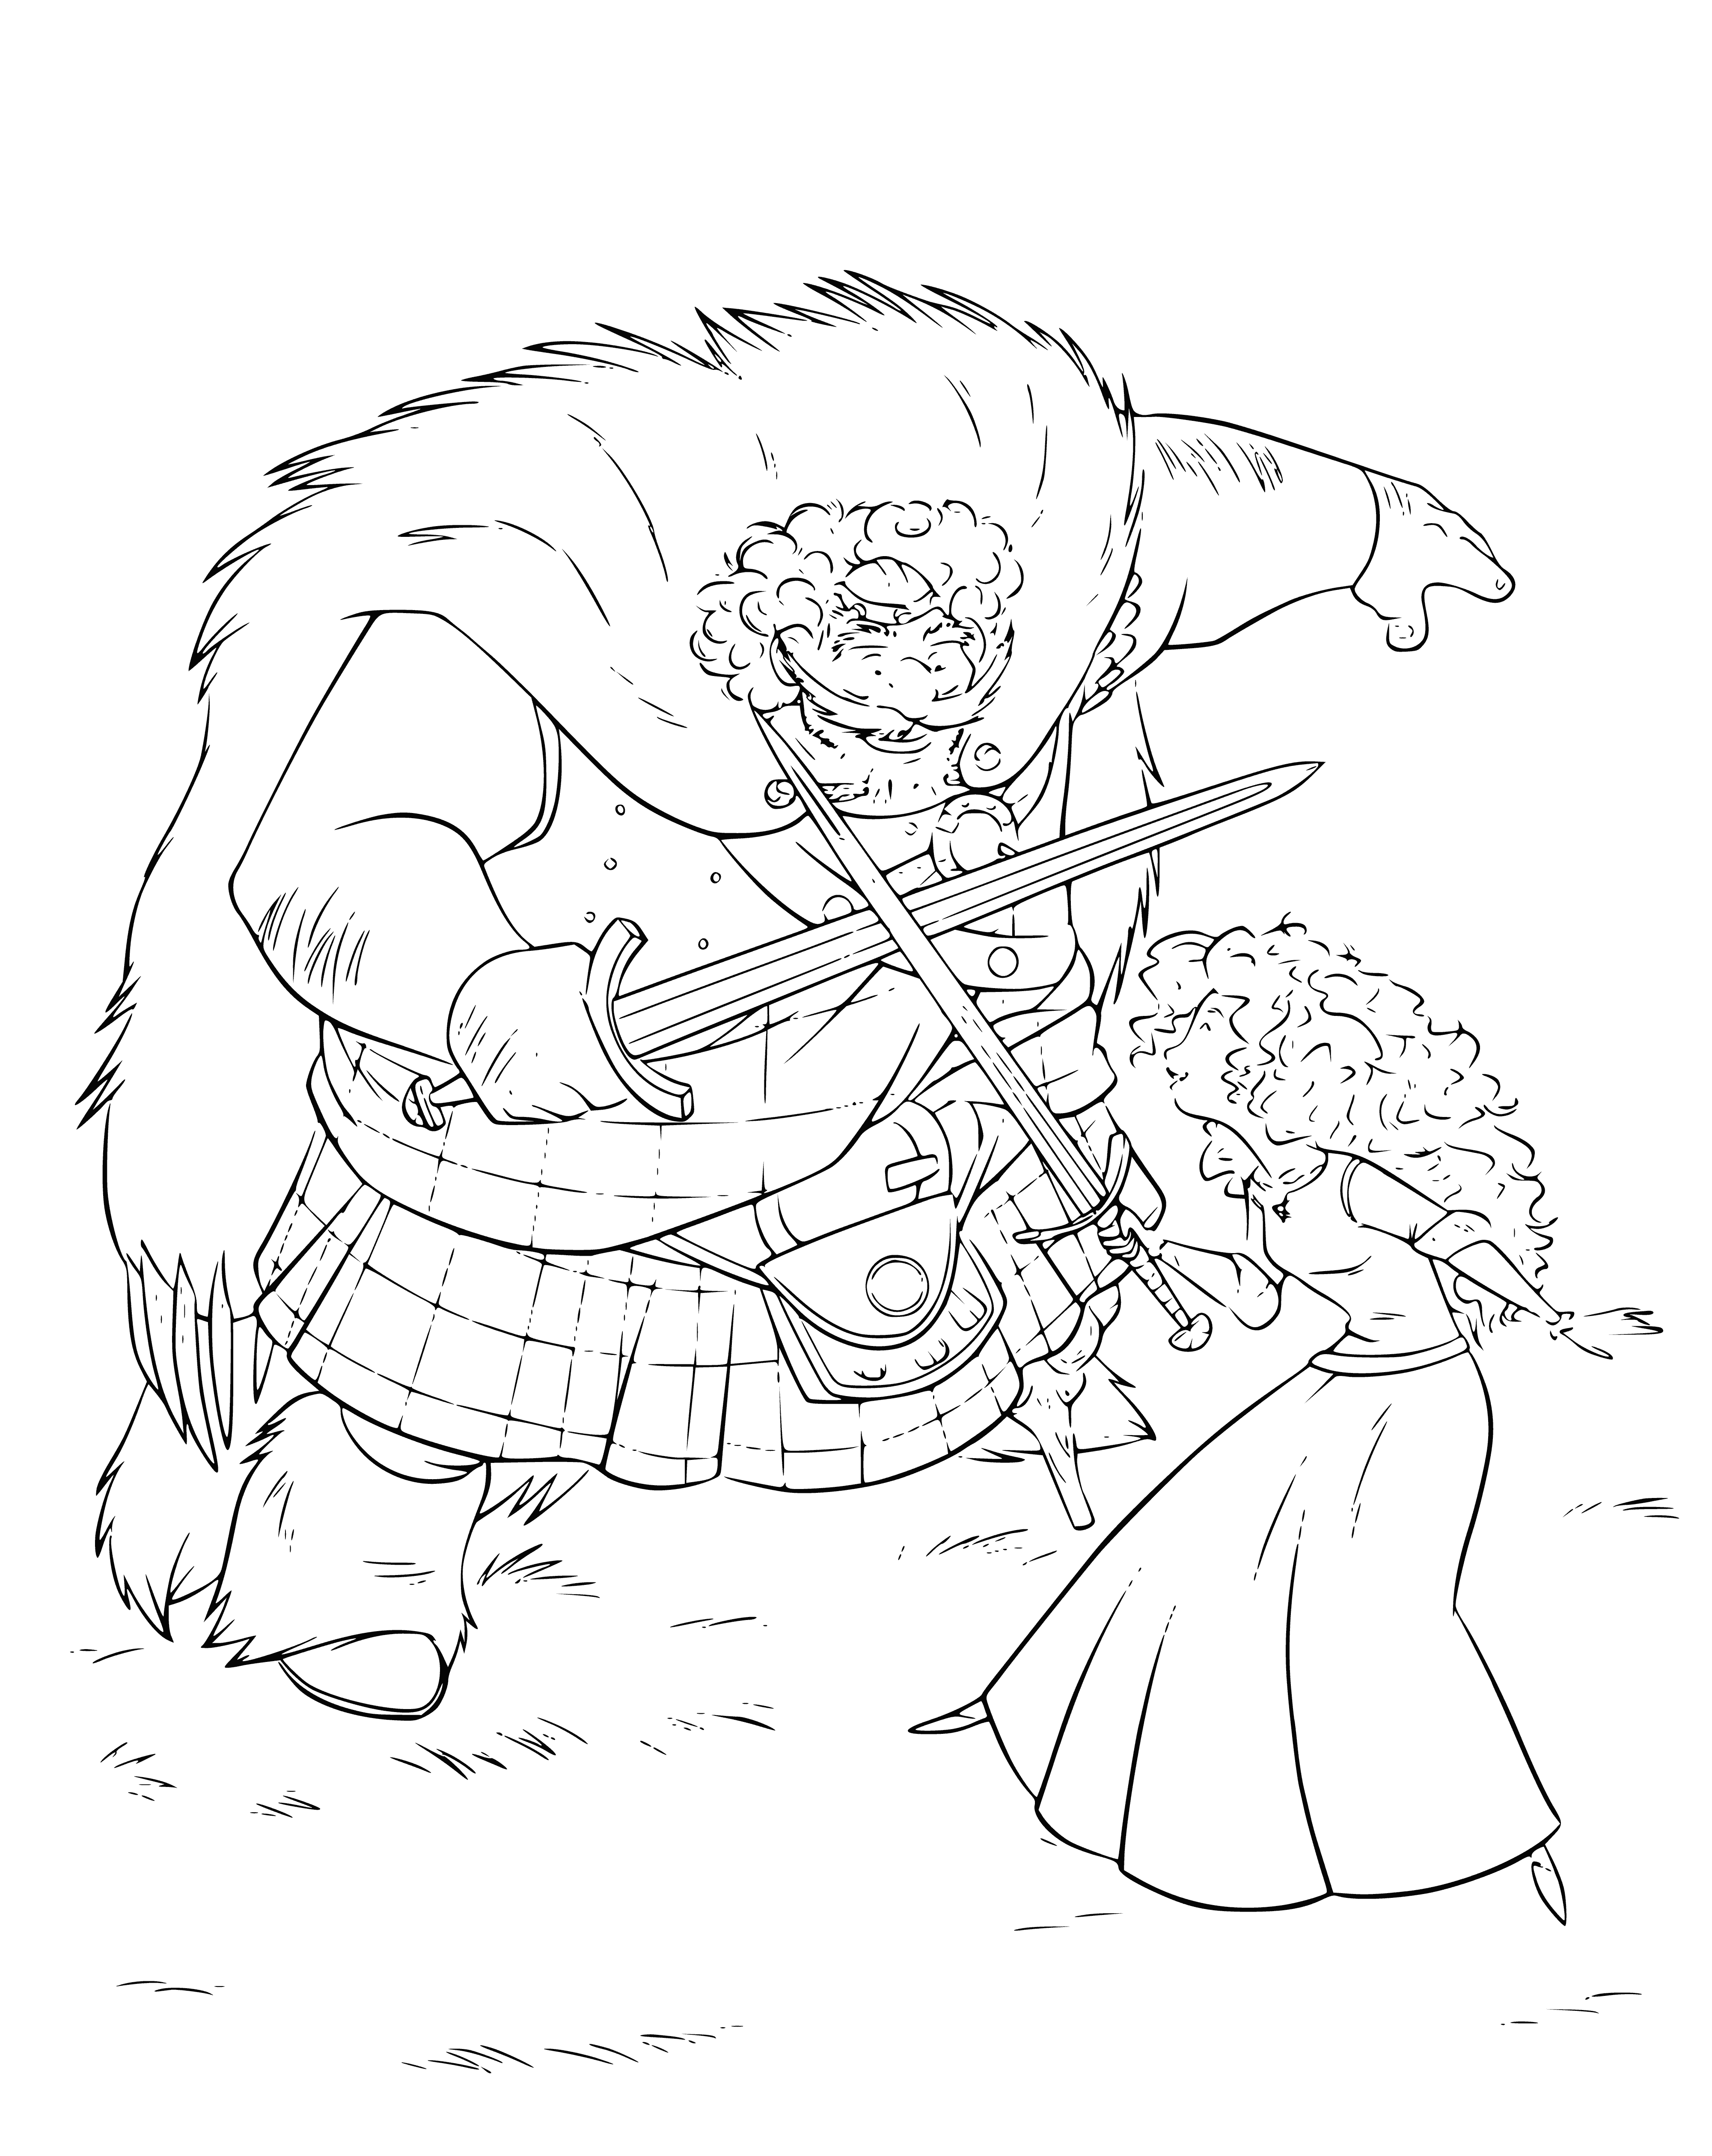 coloring page: King trains Princess Merida in archery, teaching her to shoot an arrow.